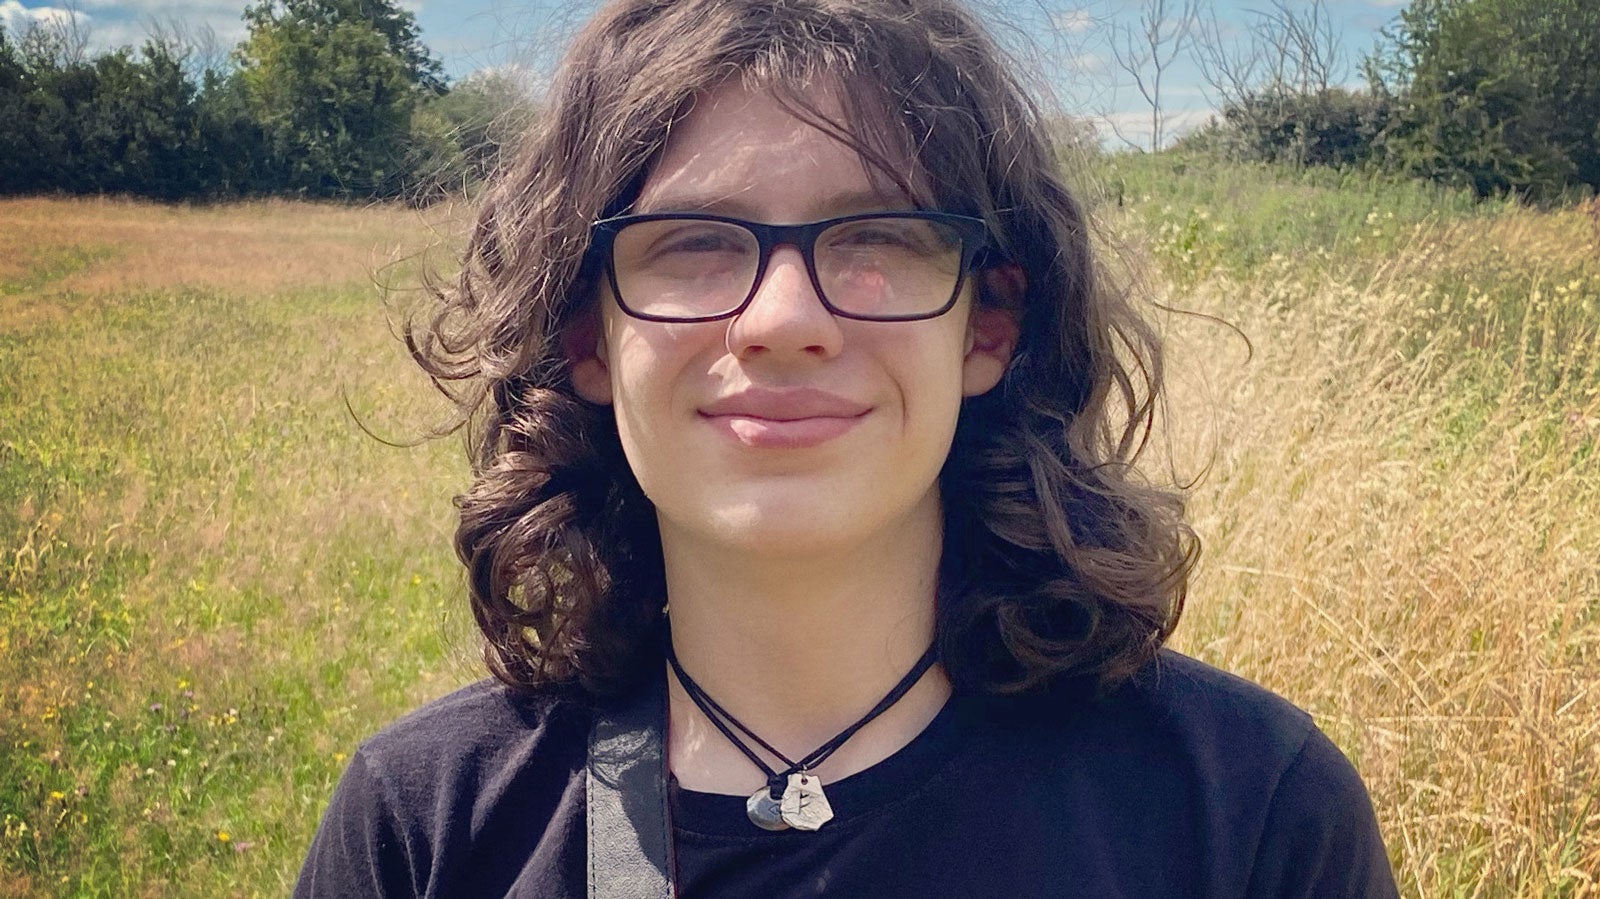 Dara McAnulty wears a black t-shirt and smiles in a summer field